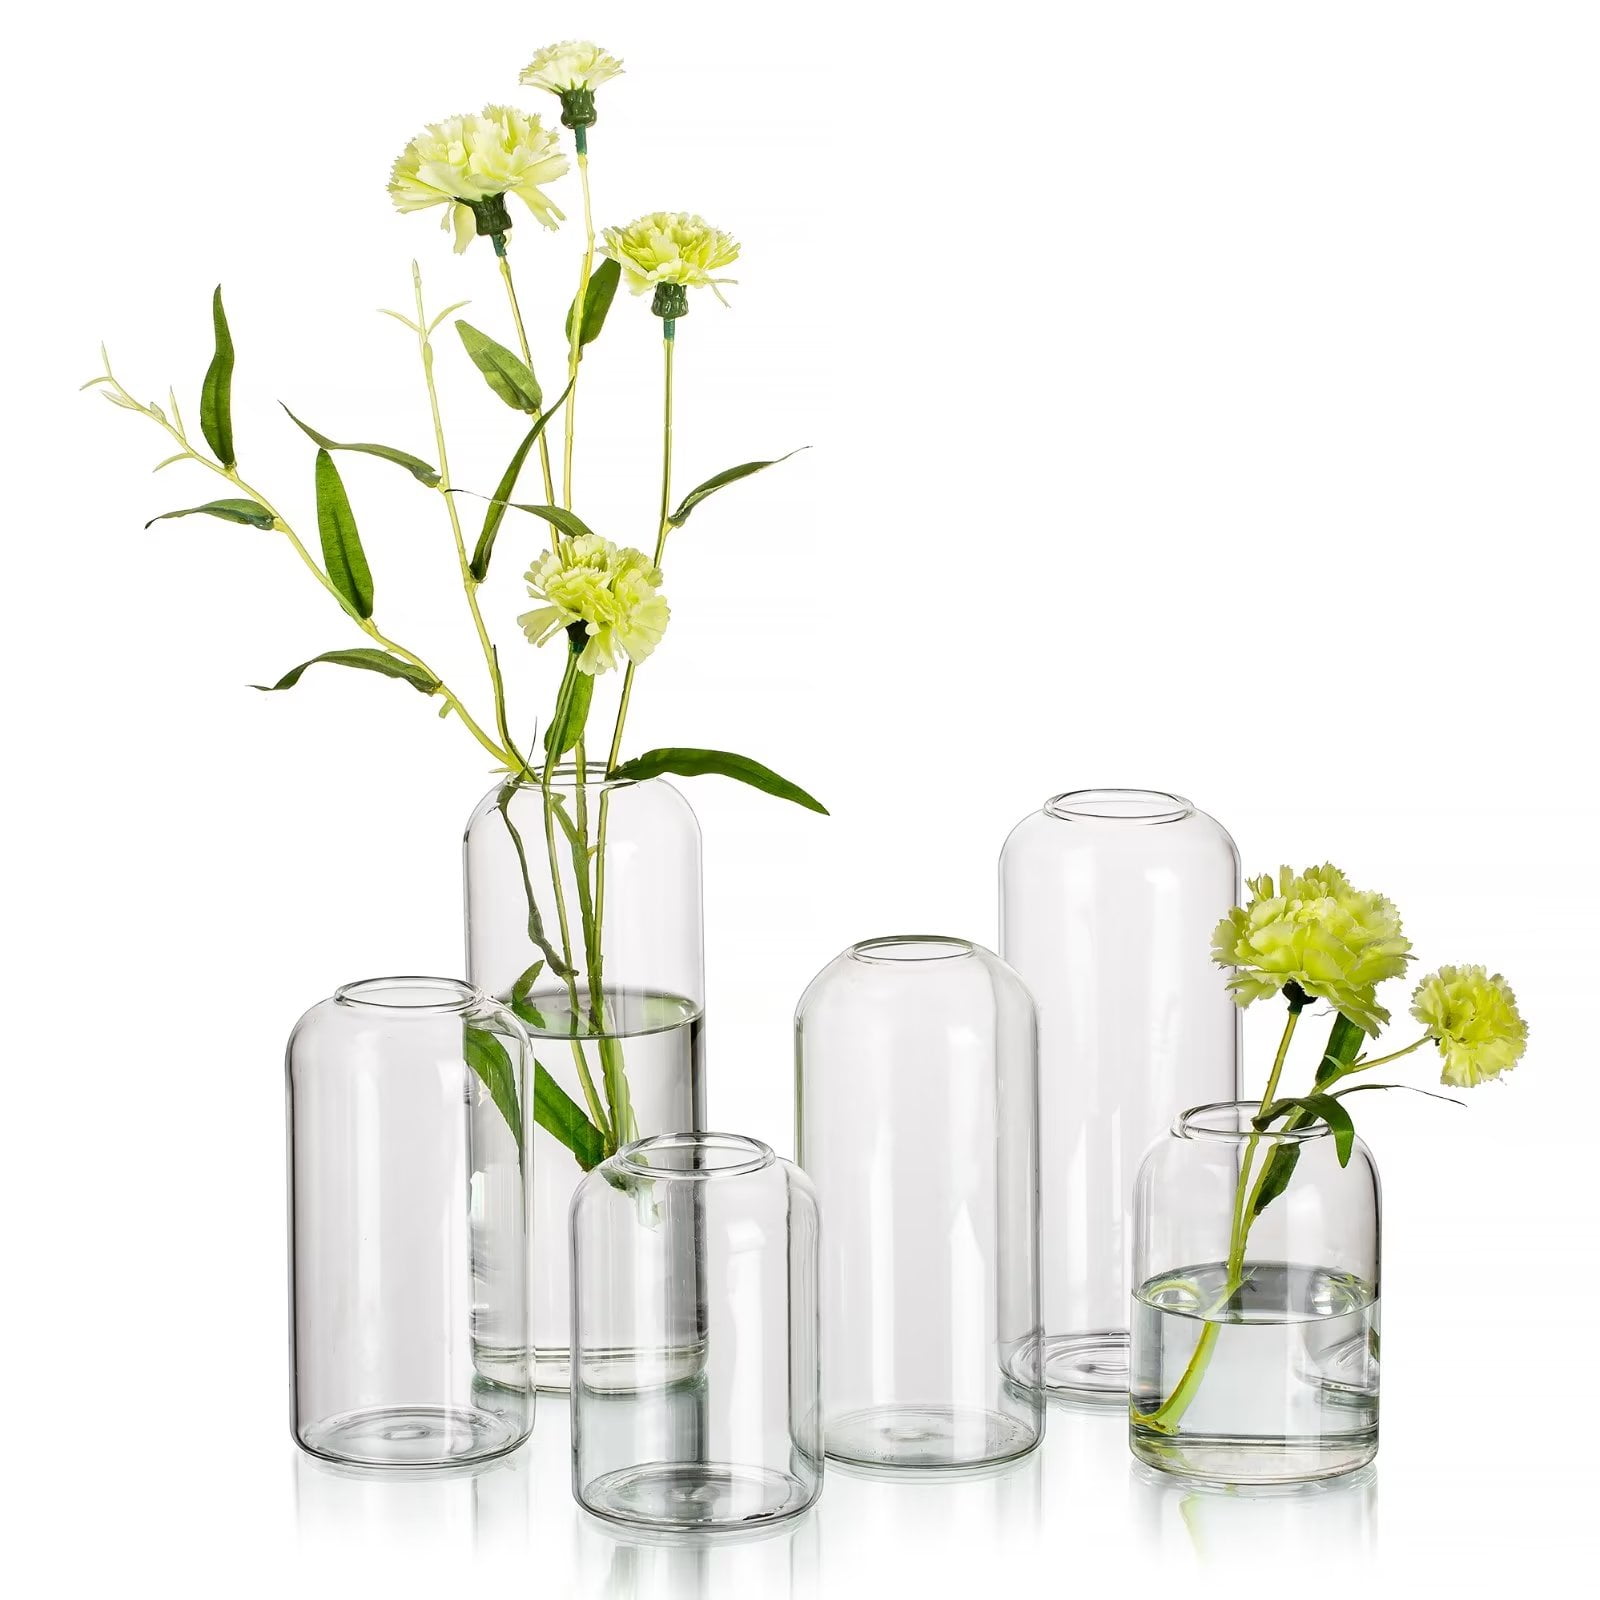 Glasseam Clear Vases Set of 6 Modern Small Glass Cylinder Vase for Centerpieces 3.7",5.7"&7" Walmart.com